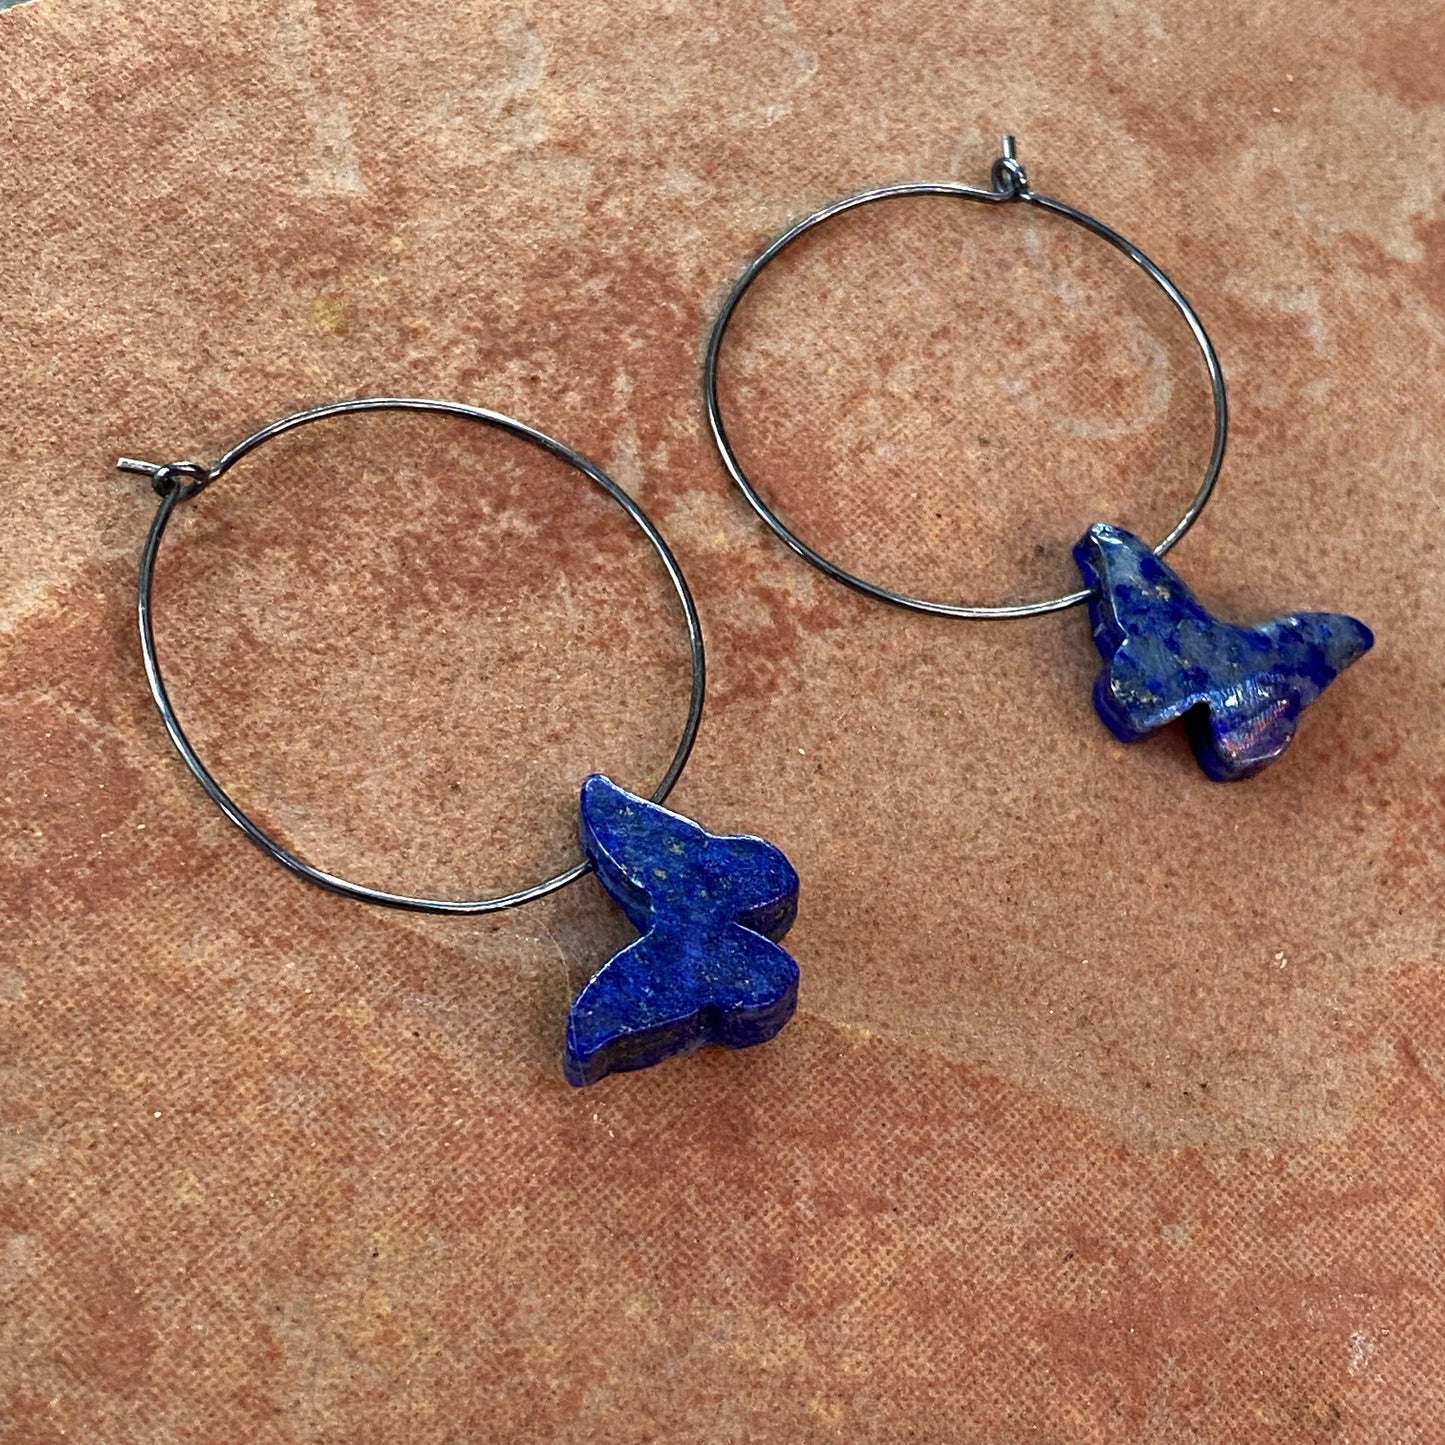 Oxidized Sterling silver hoops with Lapis Lazuli Gemstone butterflies